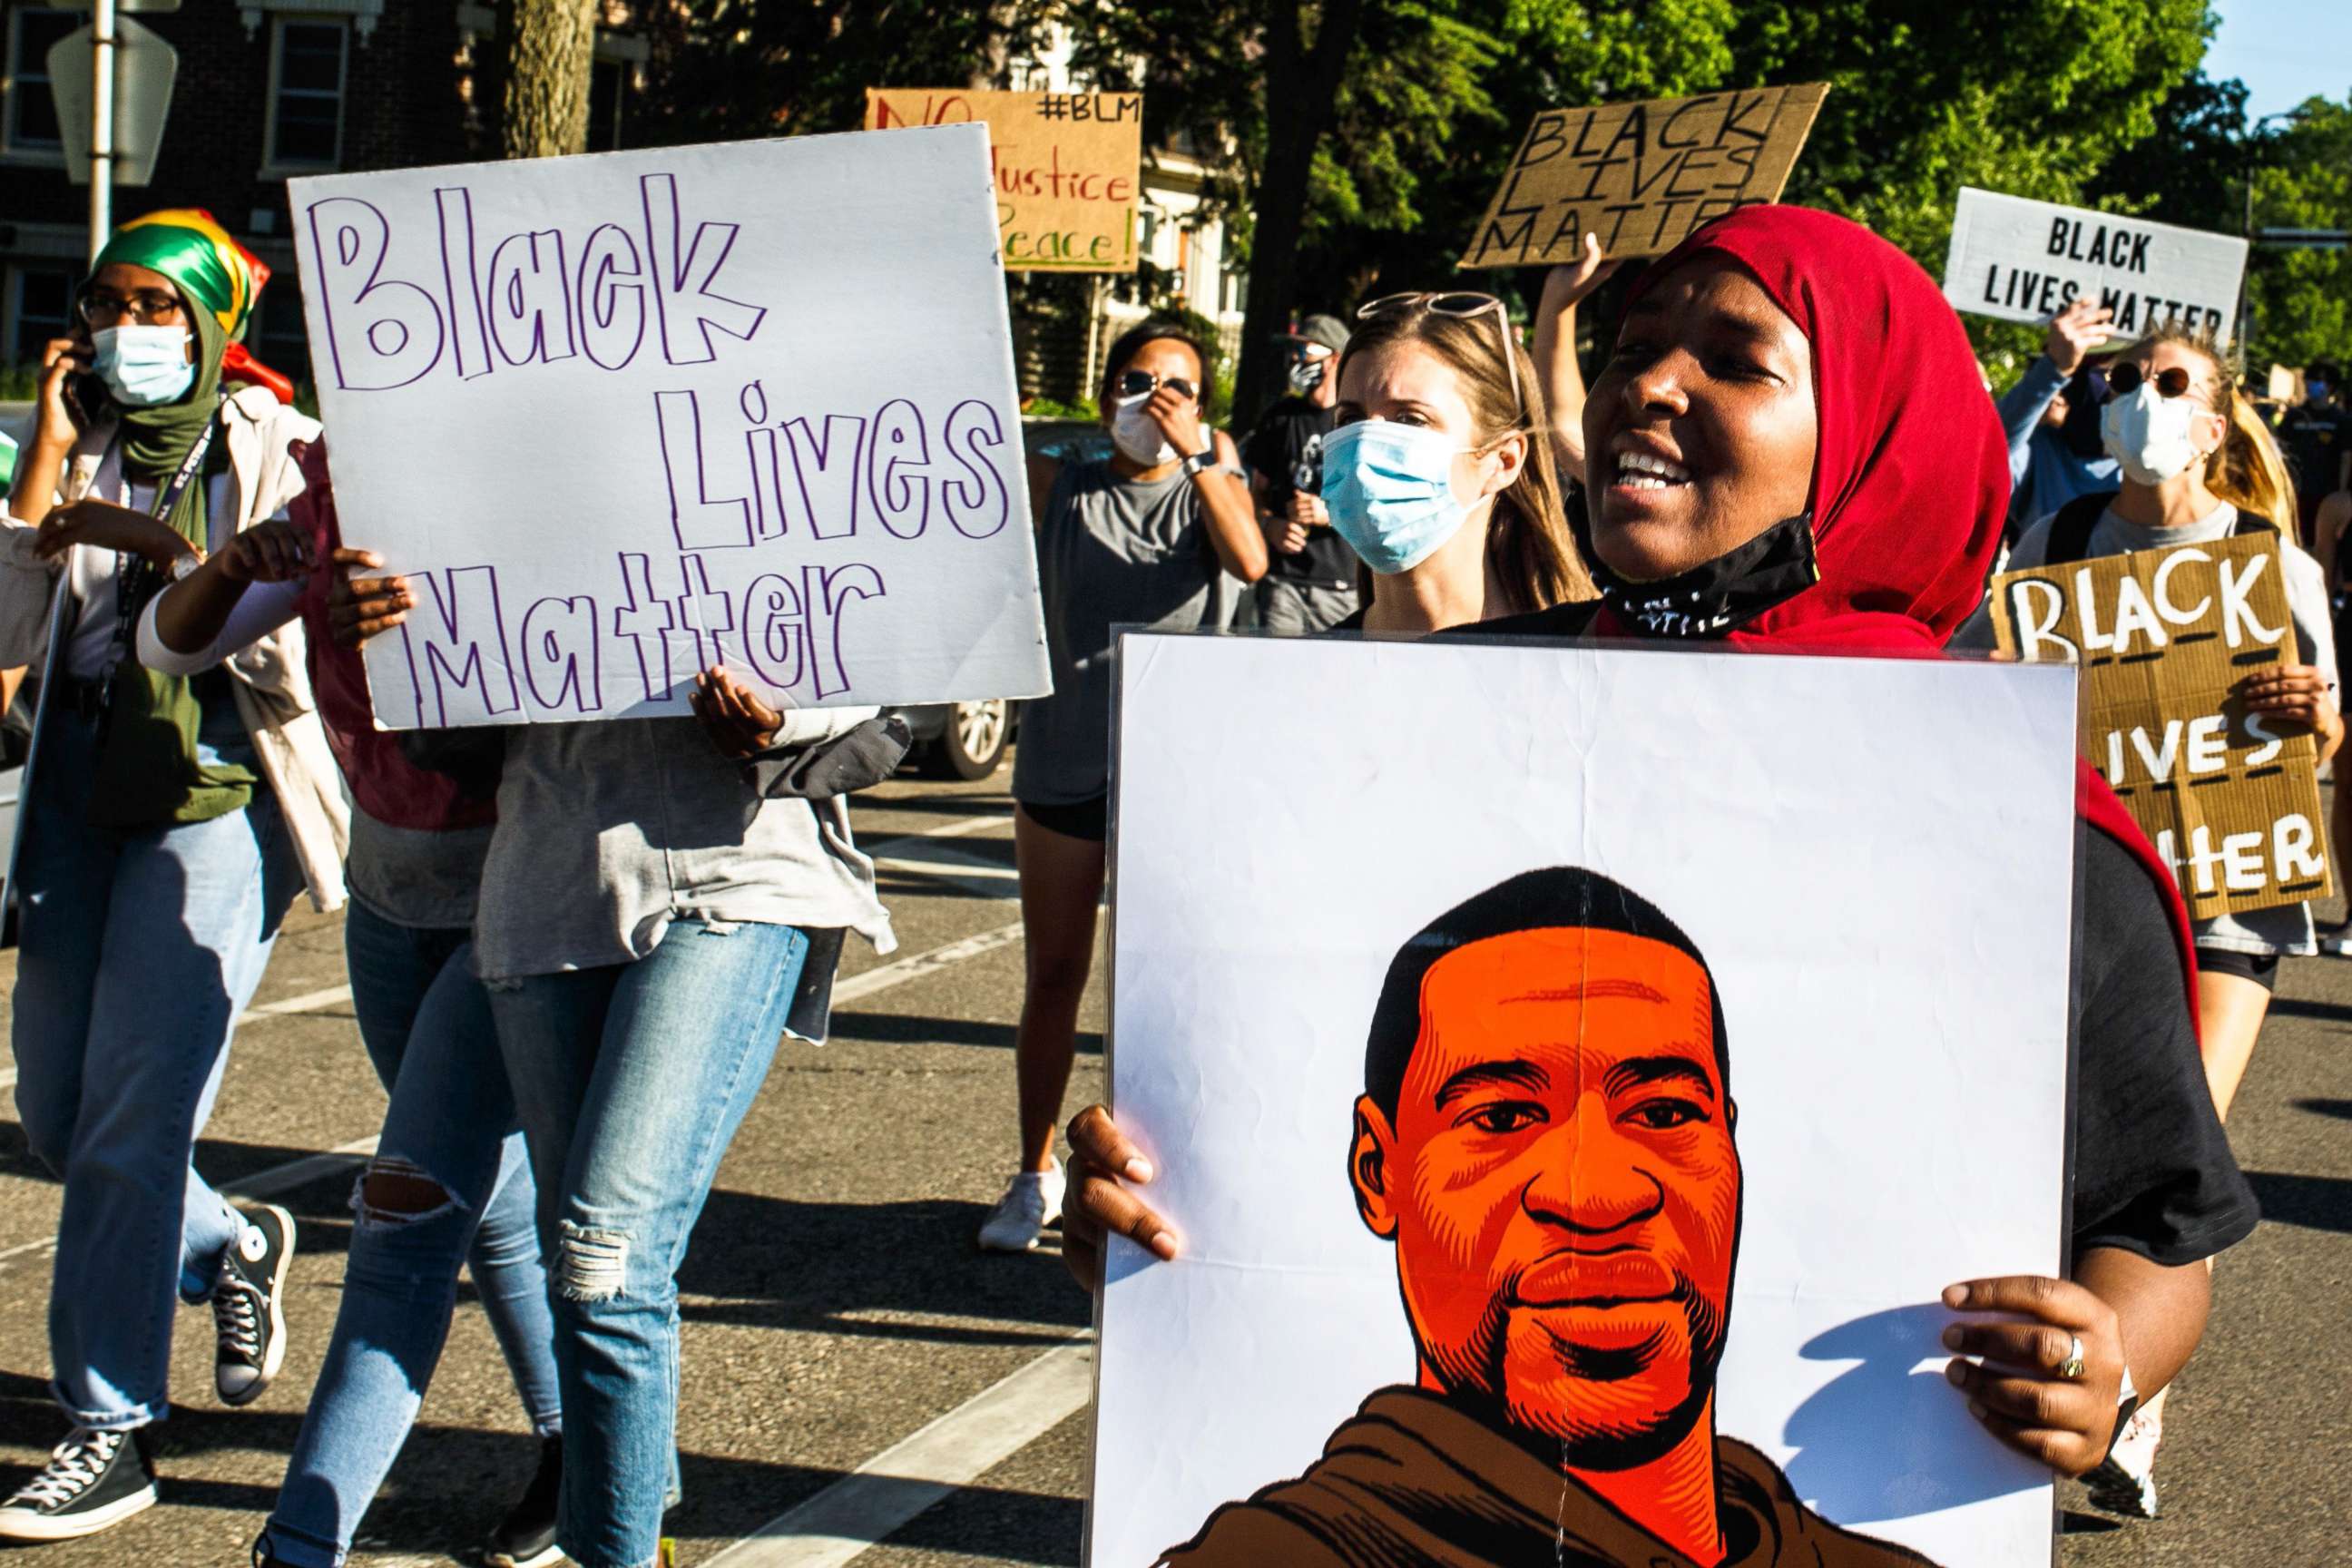 PHOTO: People hold signs and protest against the death of George Floyd, June 5, 2020 in Minneapolis, Minnesota.